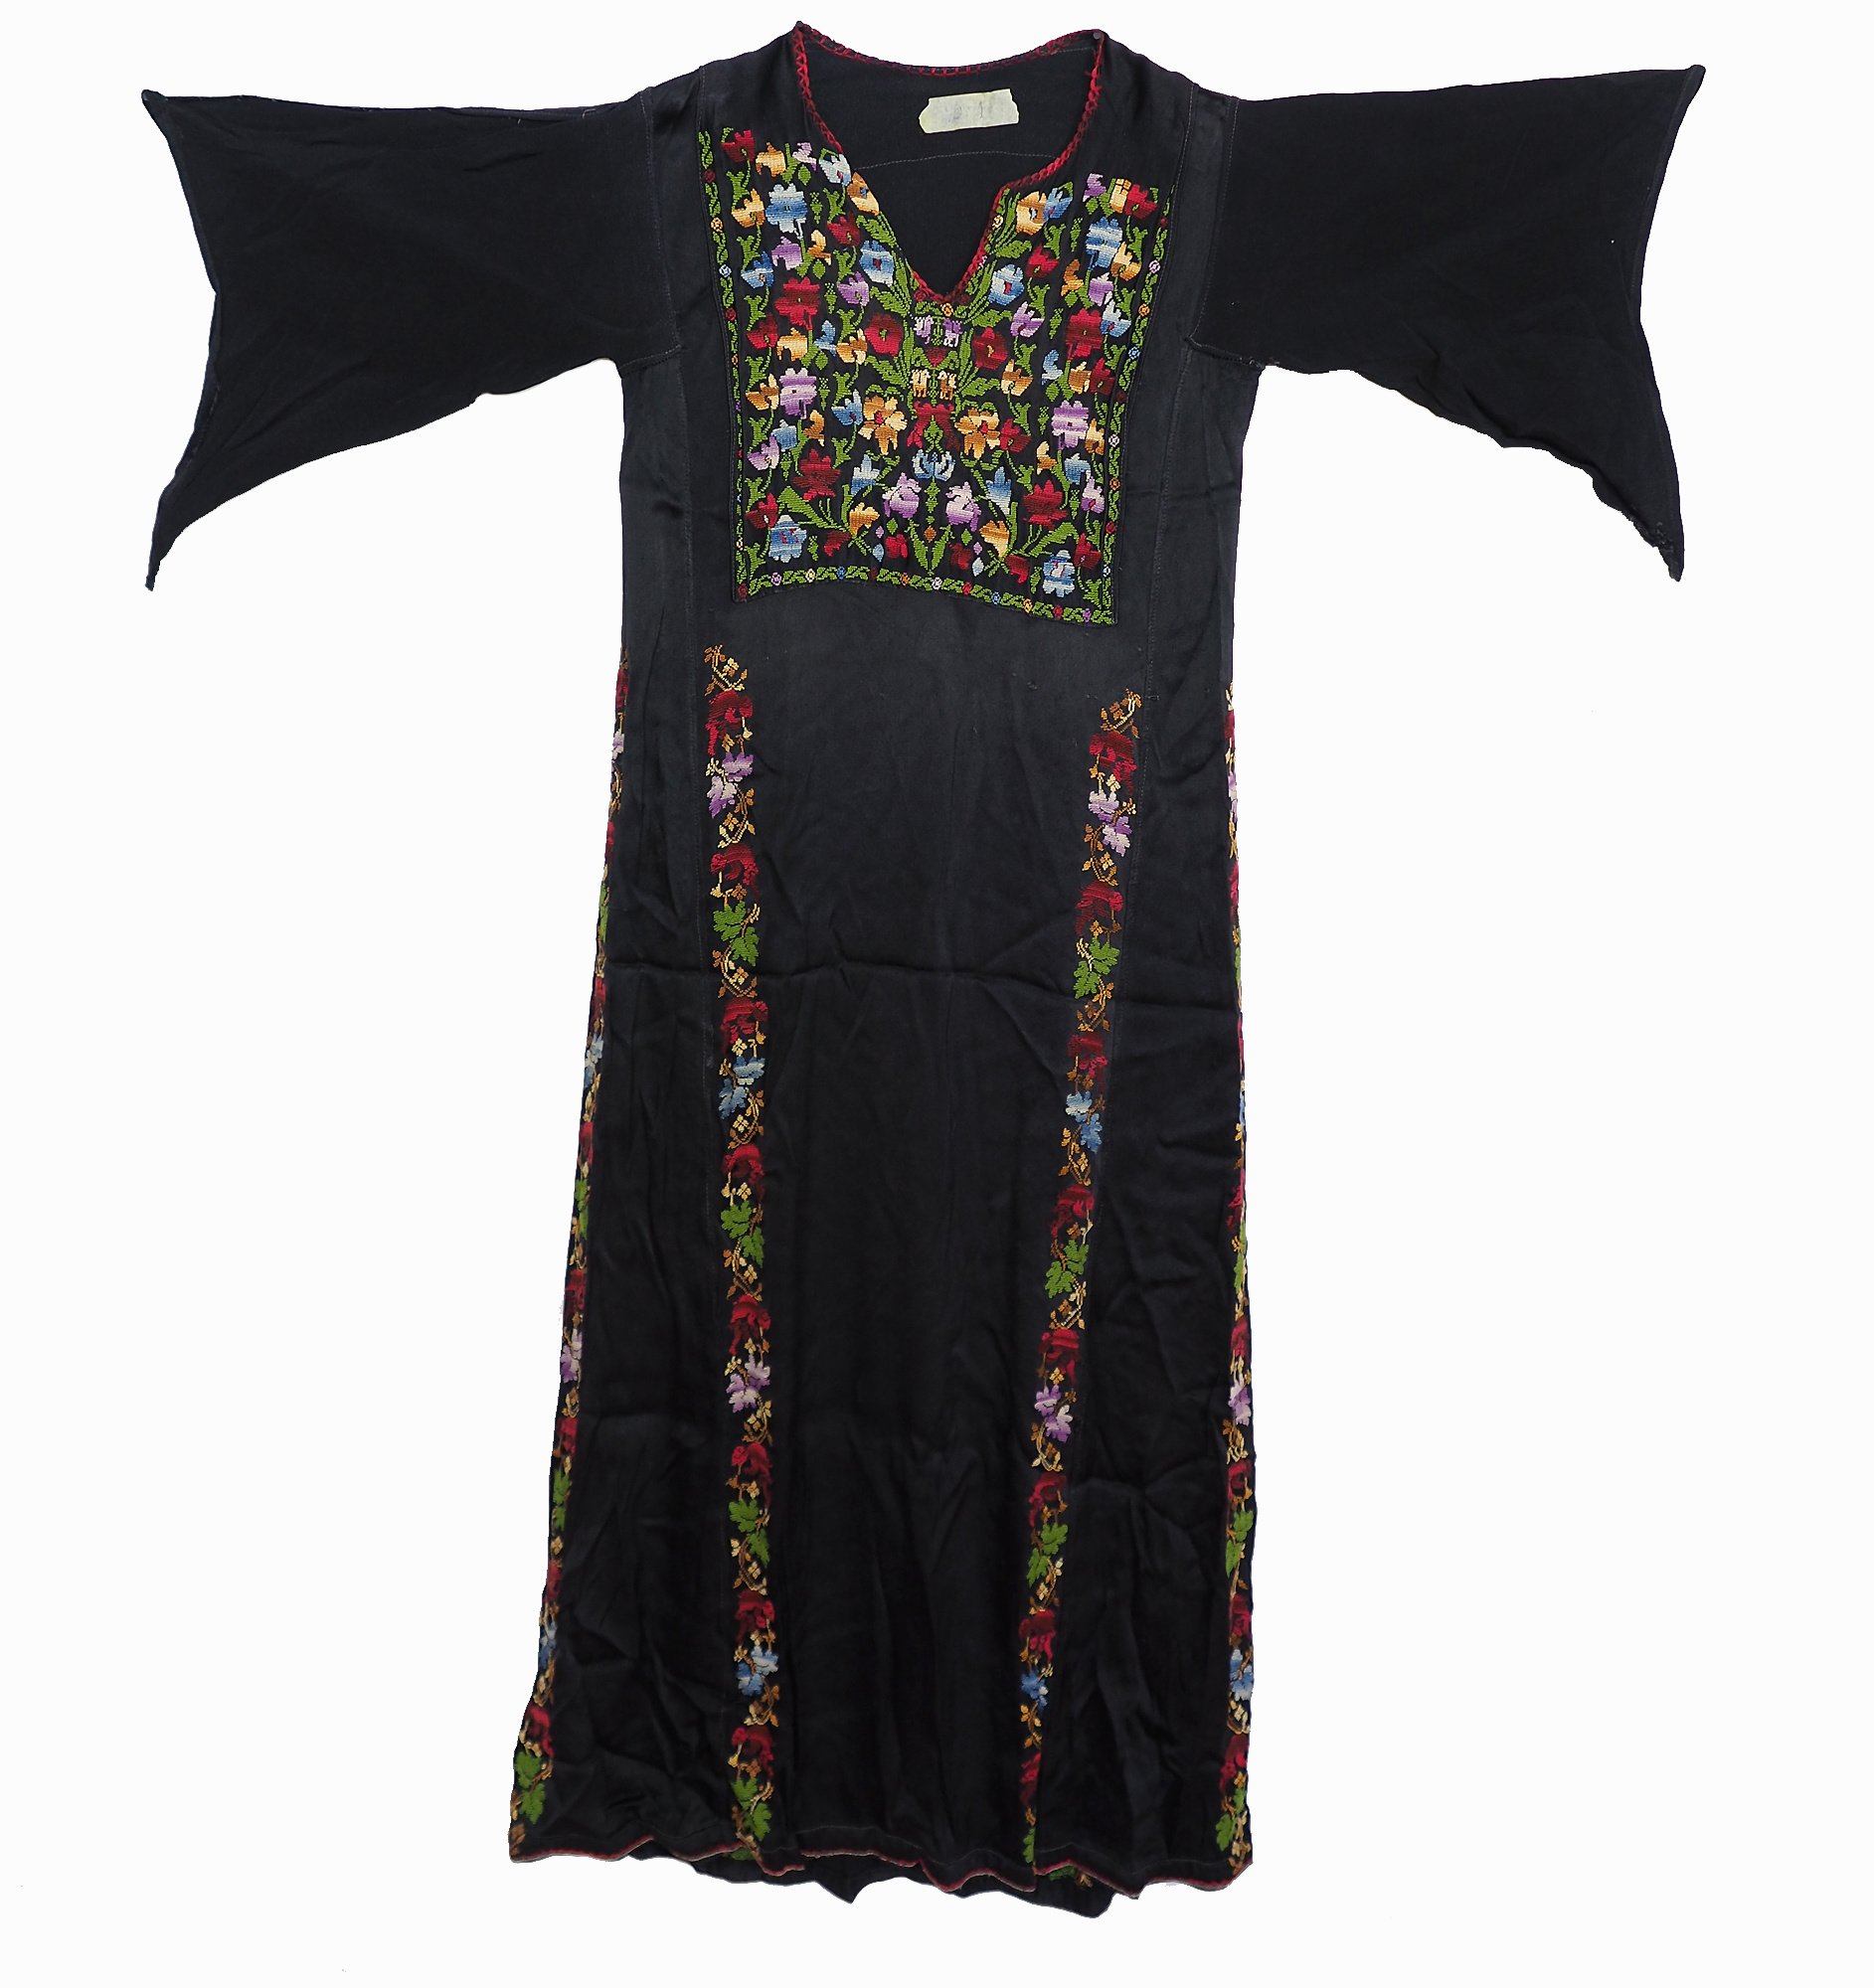 Palestinian girls embroidered ethnic dress No:1